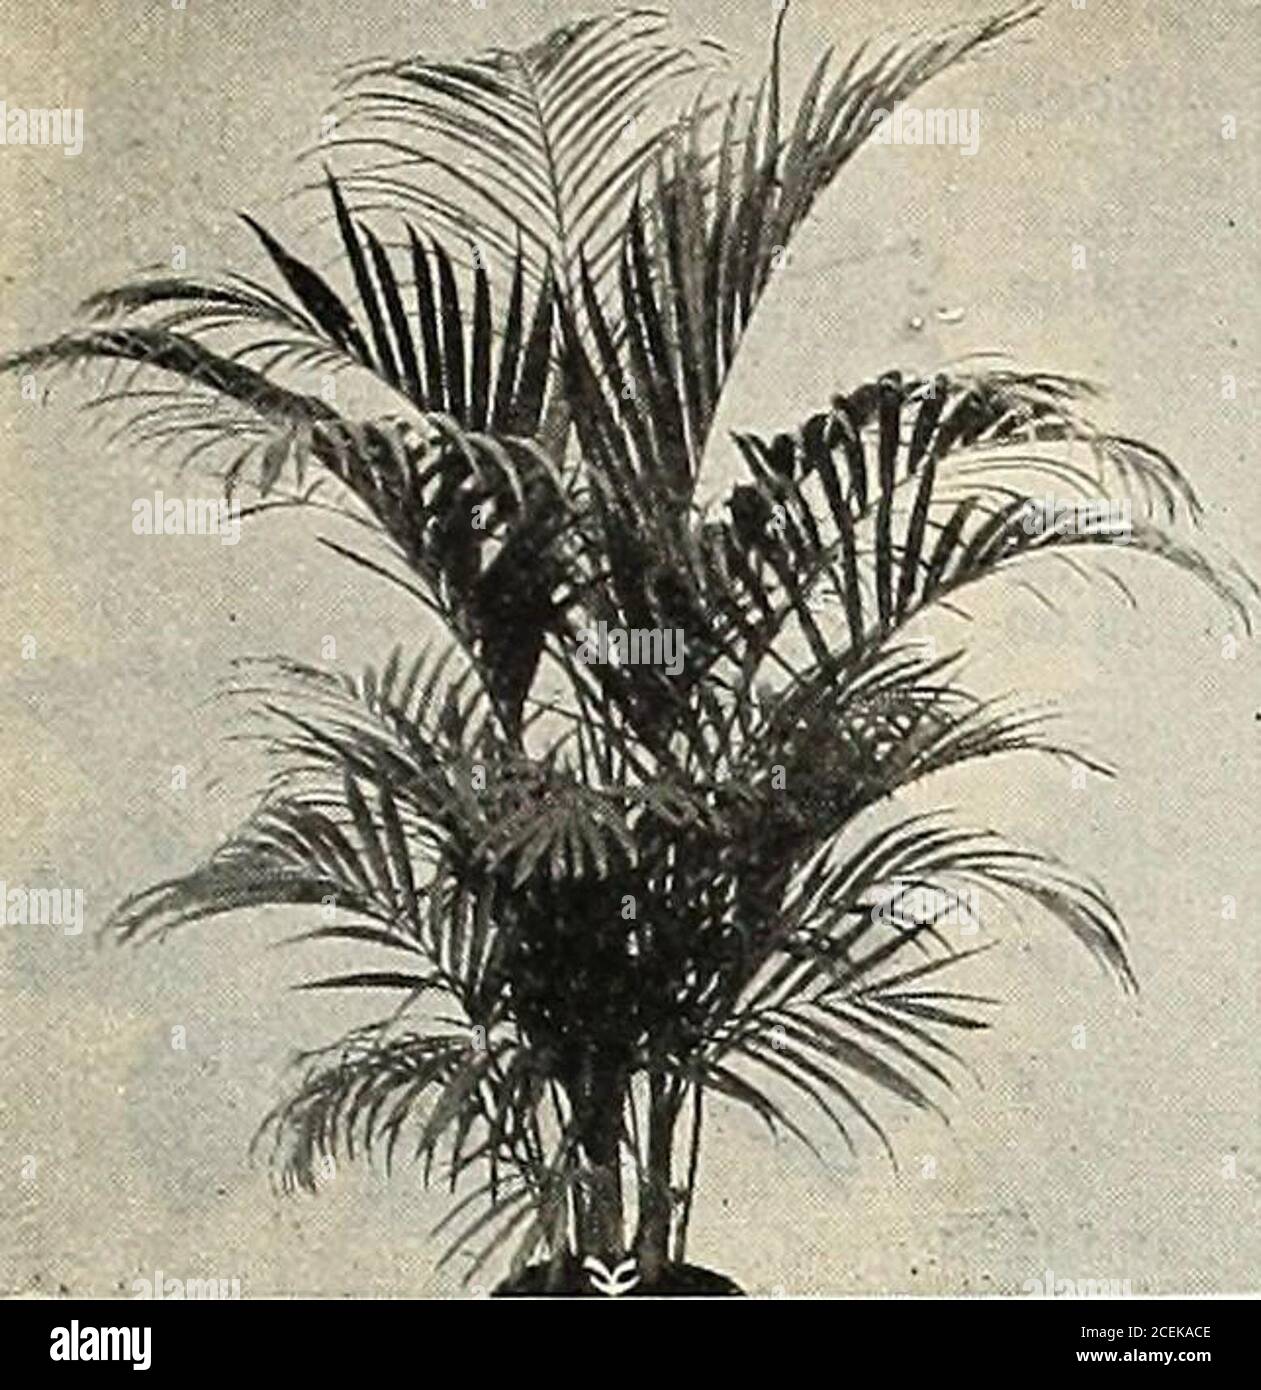 . Vaughan's book for florists. able and valuable tree fernsin cultivation. Fine plants in 5-inch pots, each. $1.00;doz. $12.00. Mikado Fern Ball. Will grow and thrive under the most adverse con-ditions. A profitable fern for Easter sales. Dormant. Each Doz. 100 5-in. diameter $0,15 $1.50 $10.00 7-9-in. diameter 25 2.50 18.00 Assorted Ferns for Fern Dishes. We have selected the varieties named below as themost useful to florists for filling ferneries and jardi-niers, and for other florist work. Inch Per PerPots 100 1000$3.50 $30.004.00 35.007 00 60.00 15.00 10.00 4.00 35.00 7.00 4.00 8.00 3.50 Stock Photo